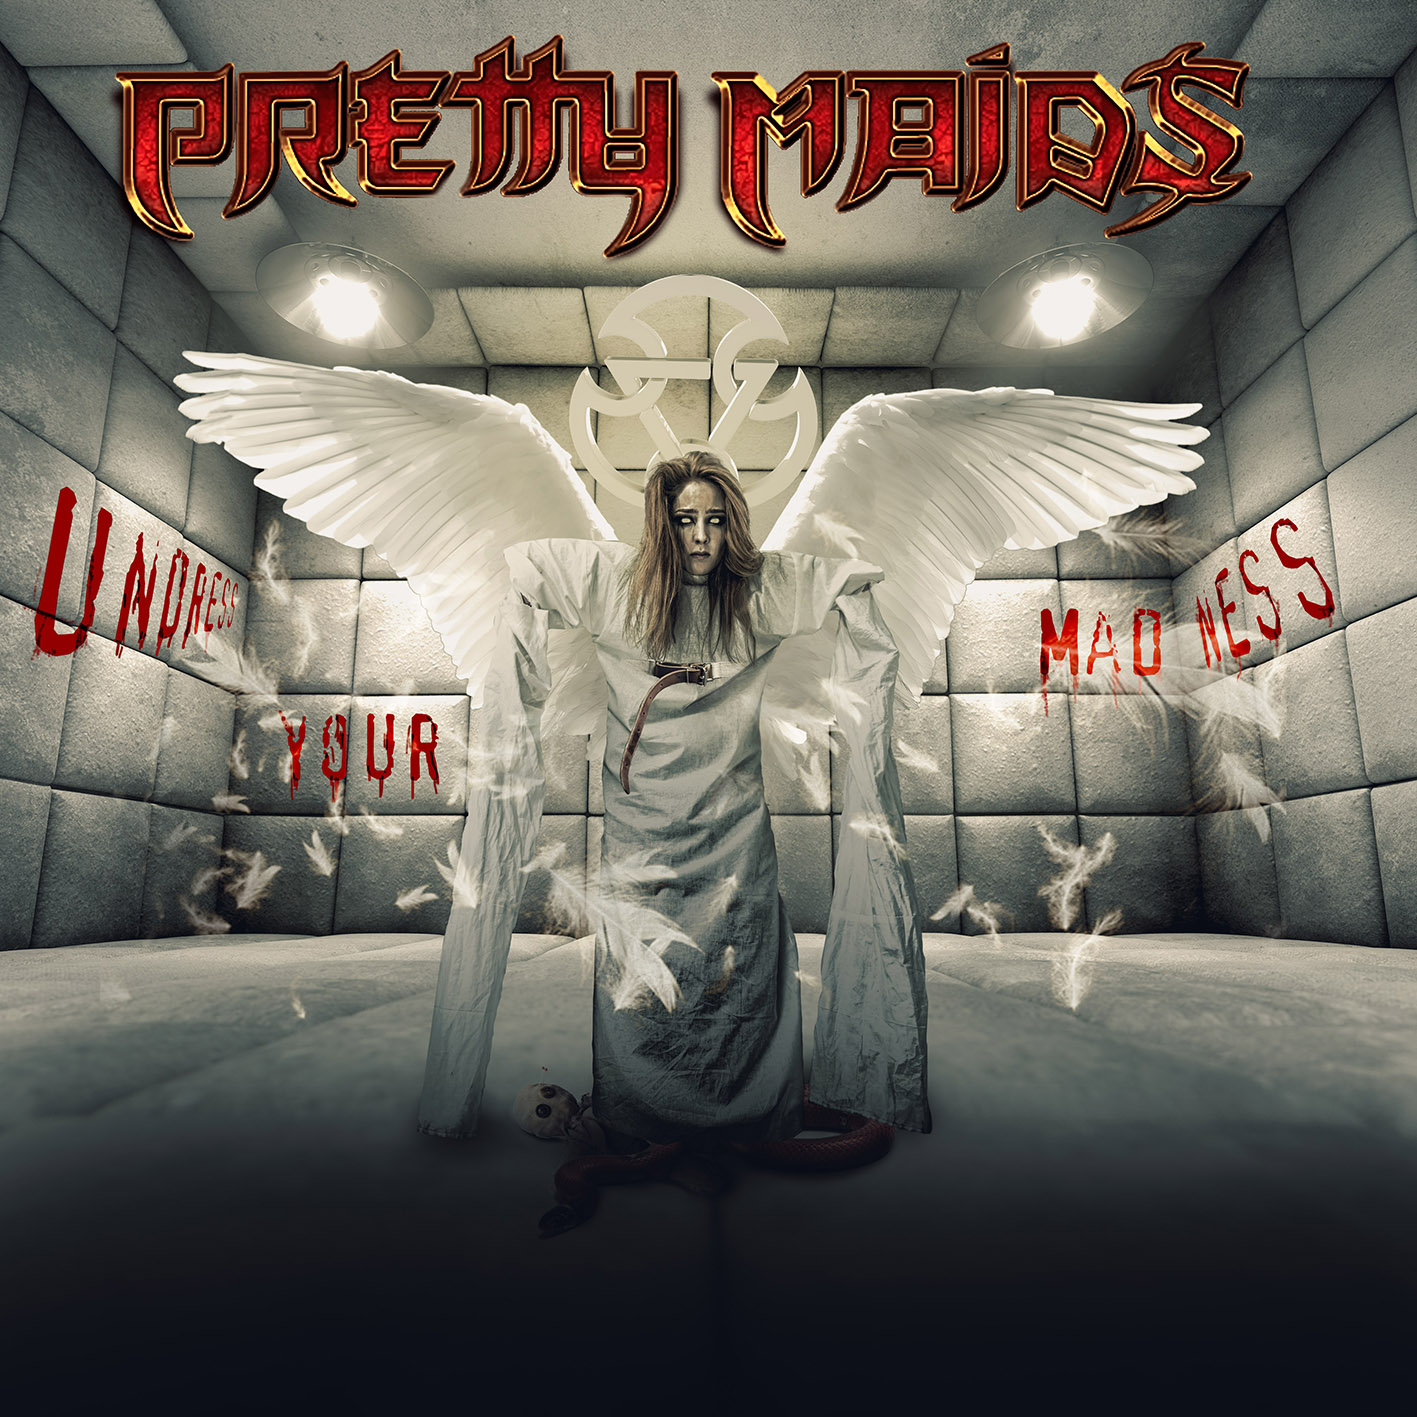 Pretty Maids (DK) – Undress Your Madness